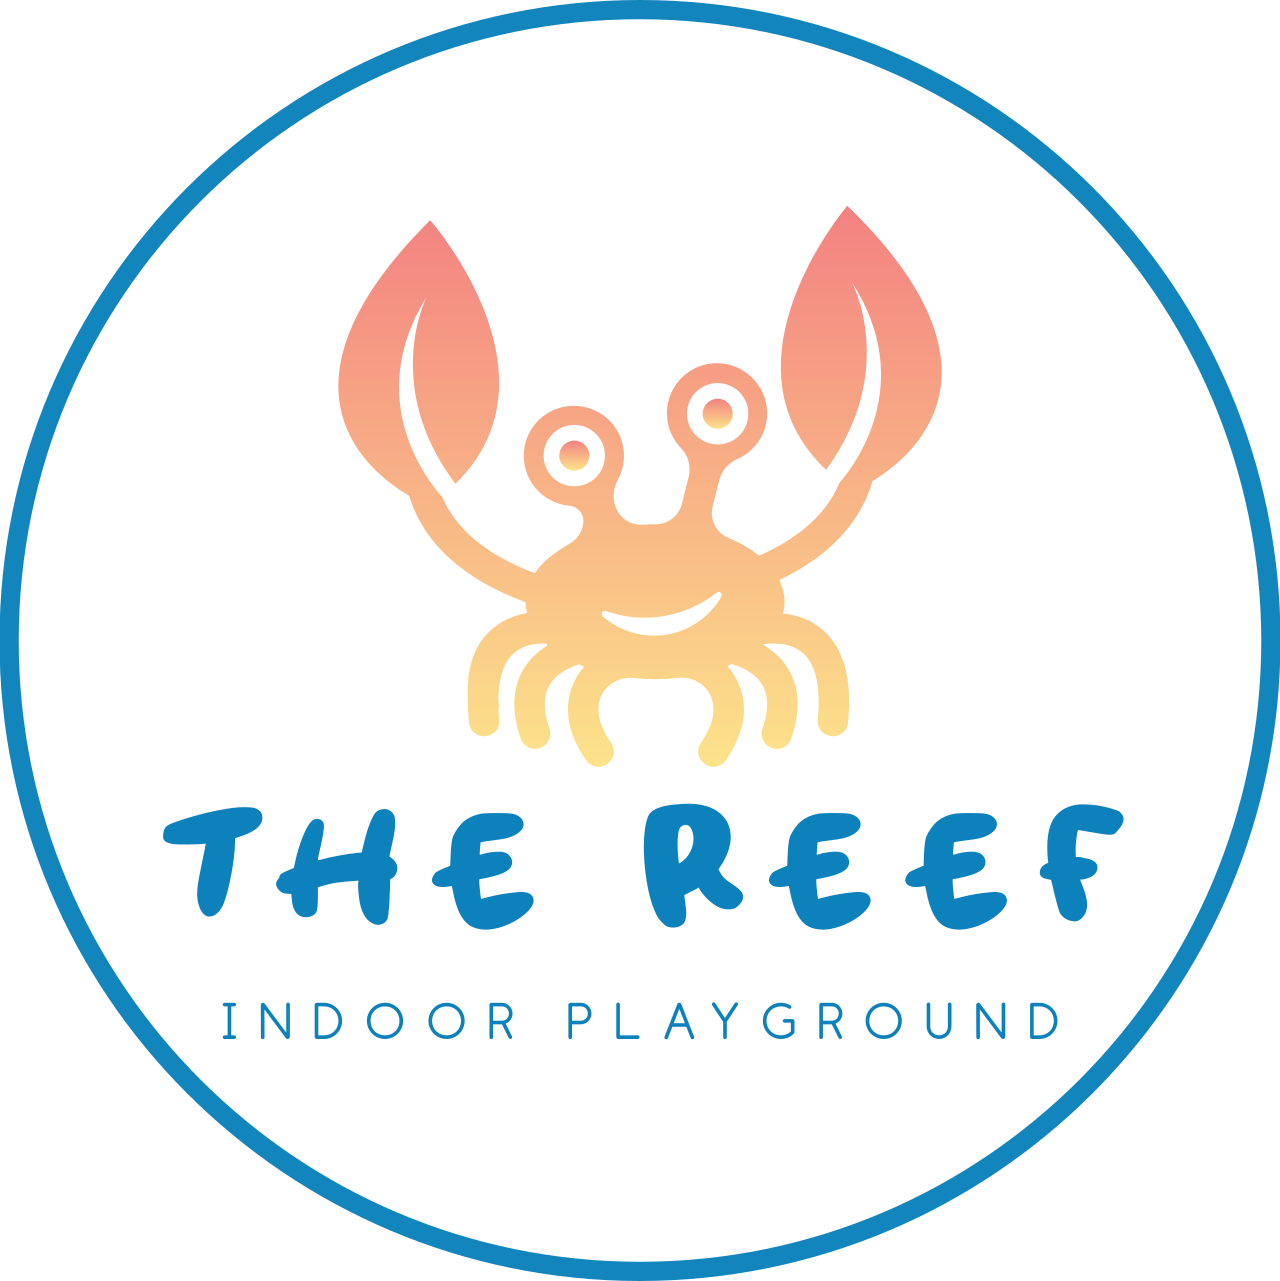 The Reef's logo